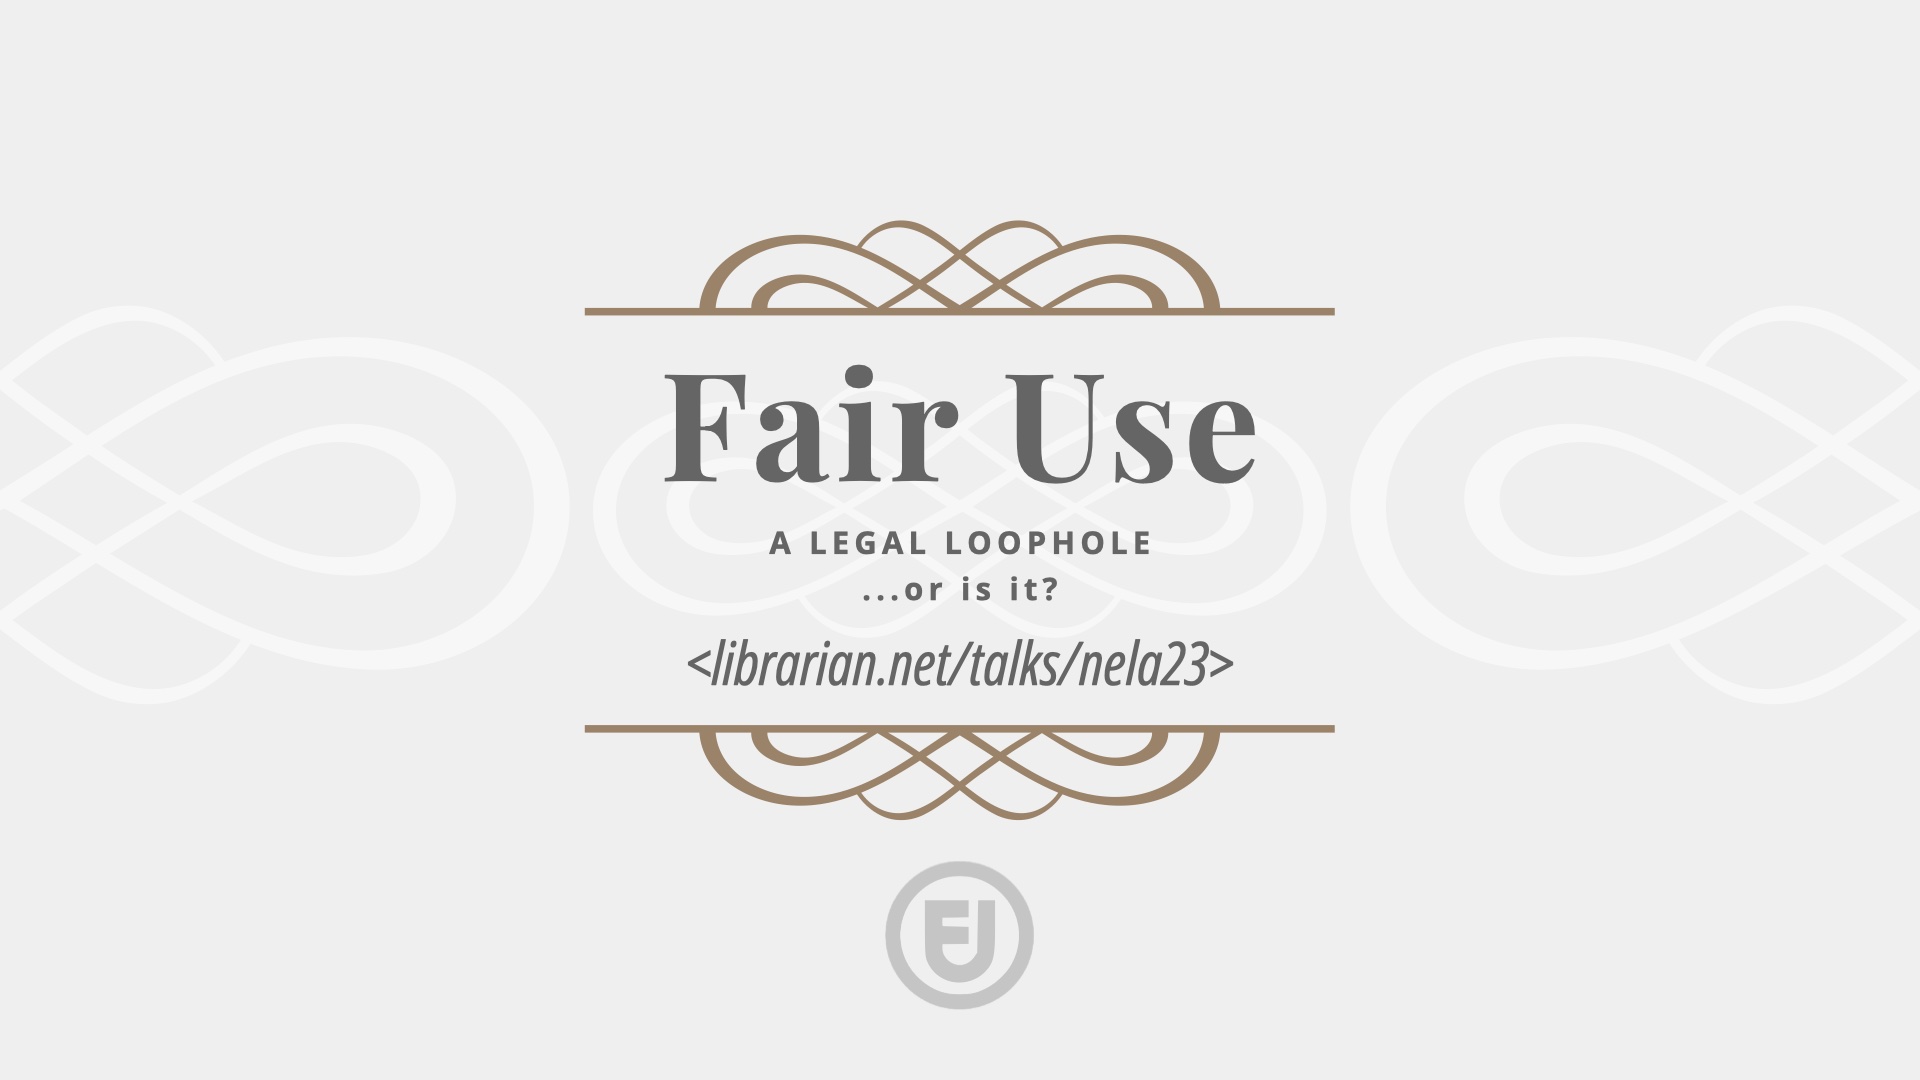 TITLE: Fair Use: A Legal Loophole... or Is It?, with URL and fair use logo